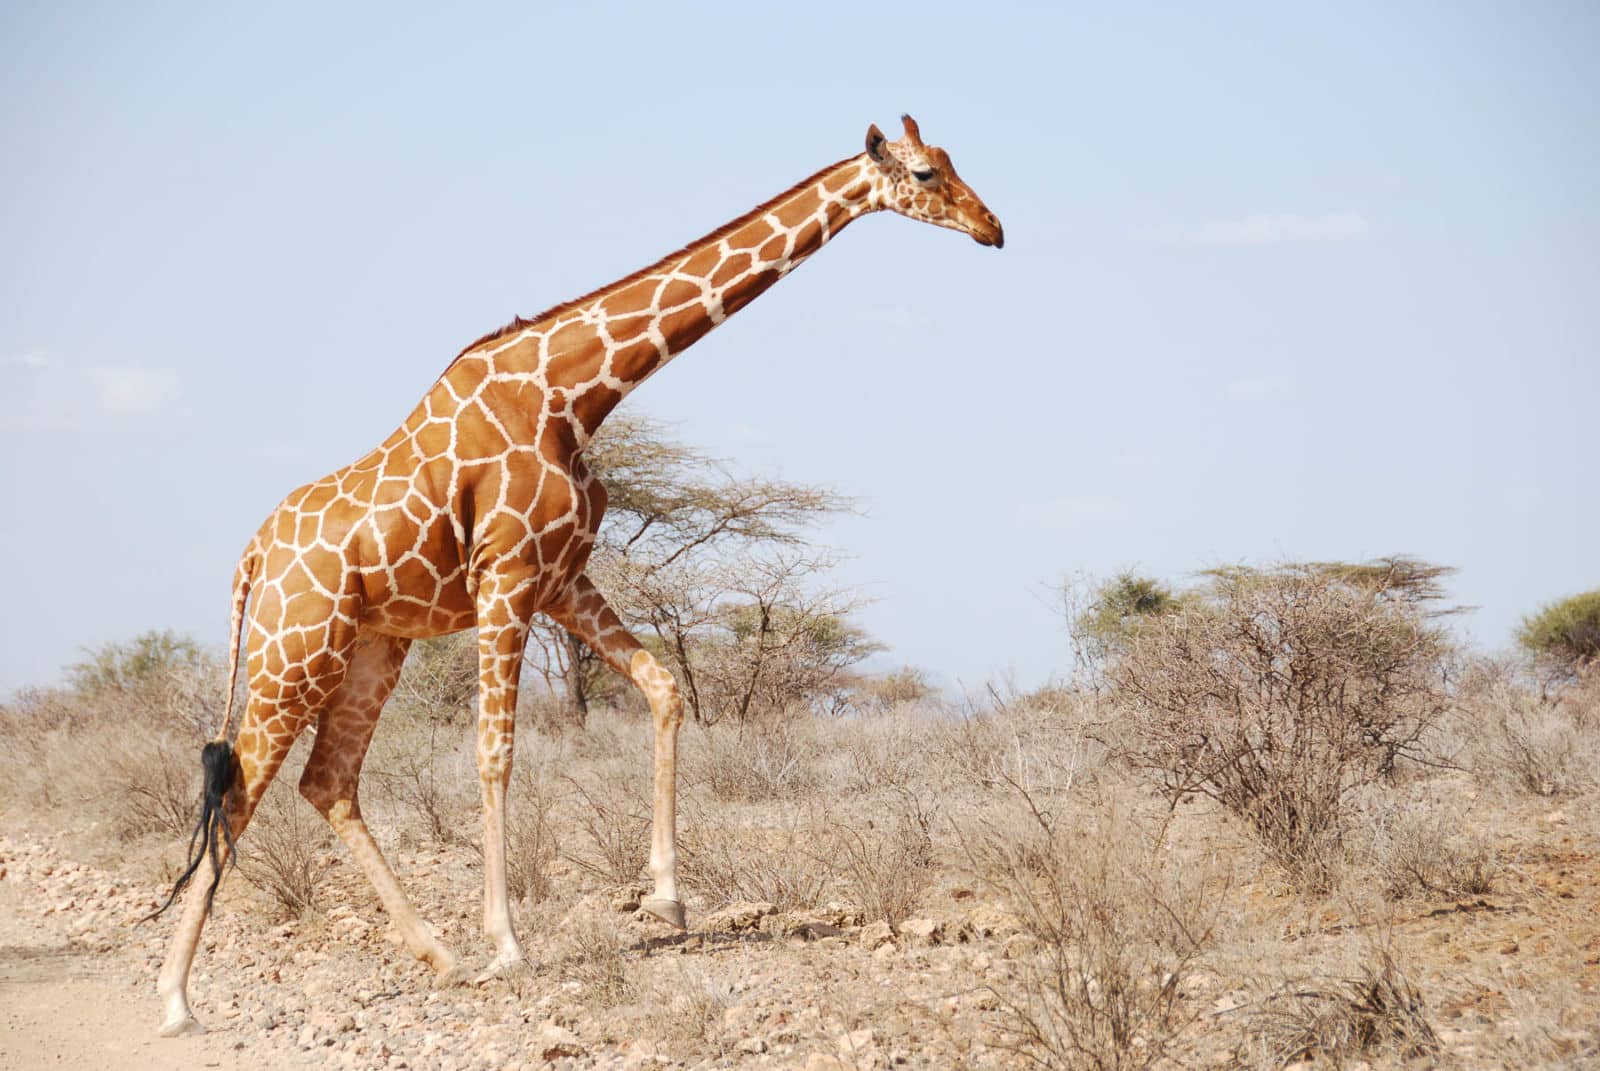 Facts About Reticulated Giraffe